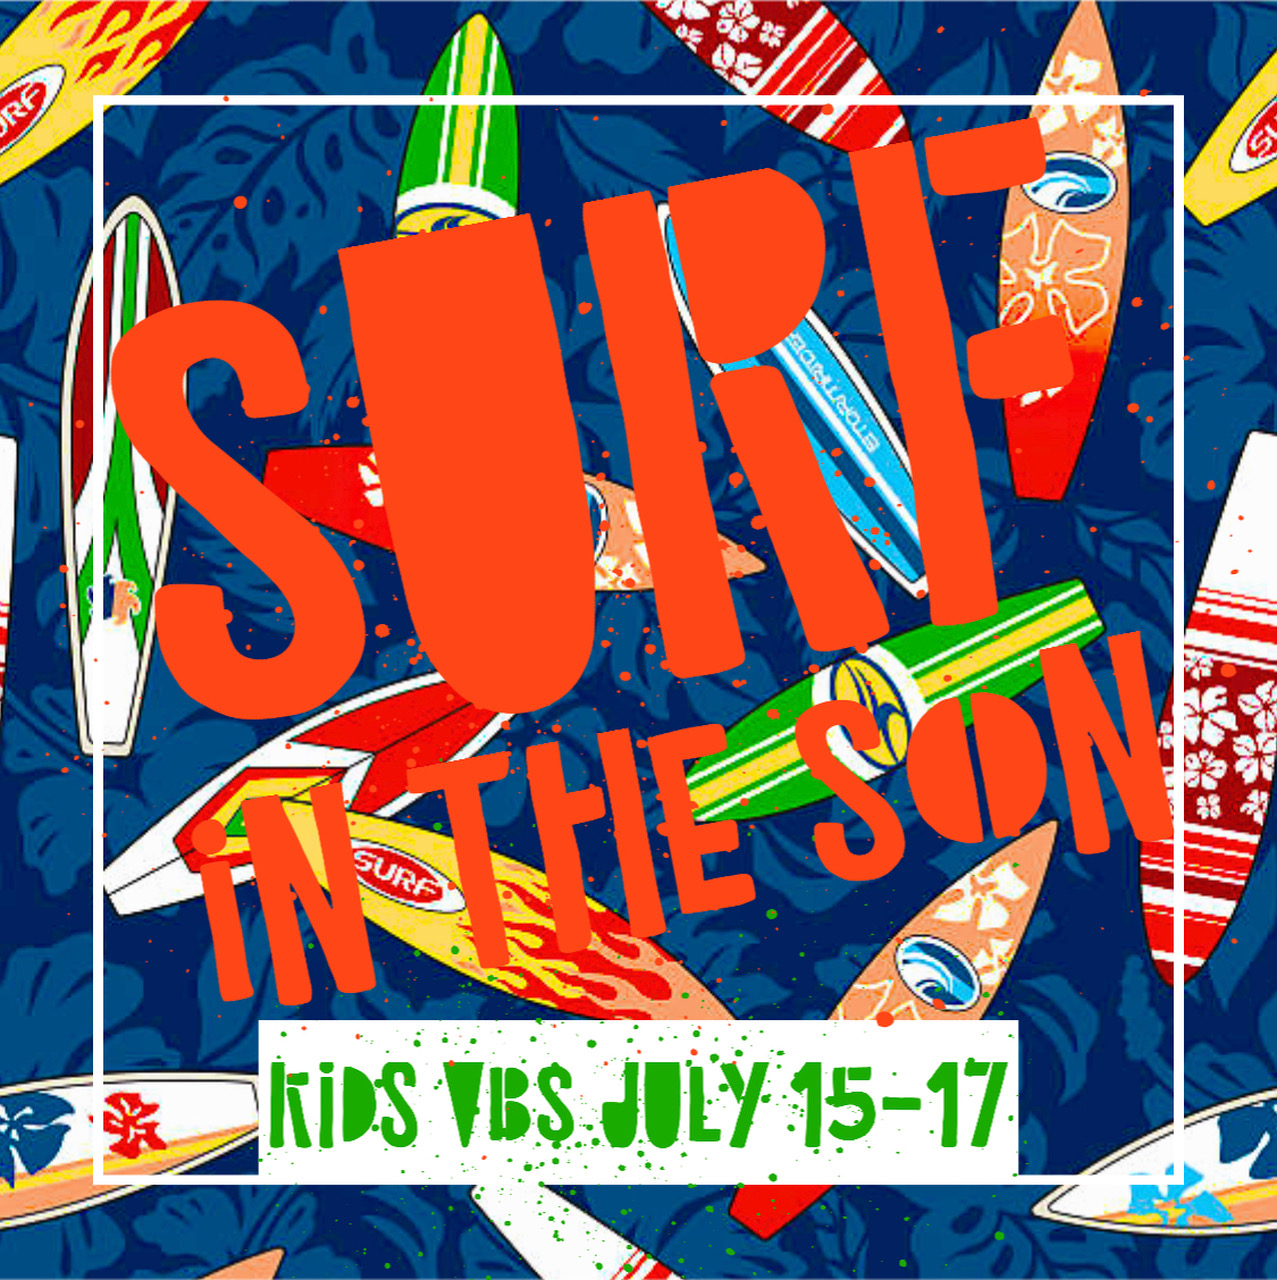 Surf in the Son - Kids VBS